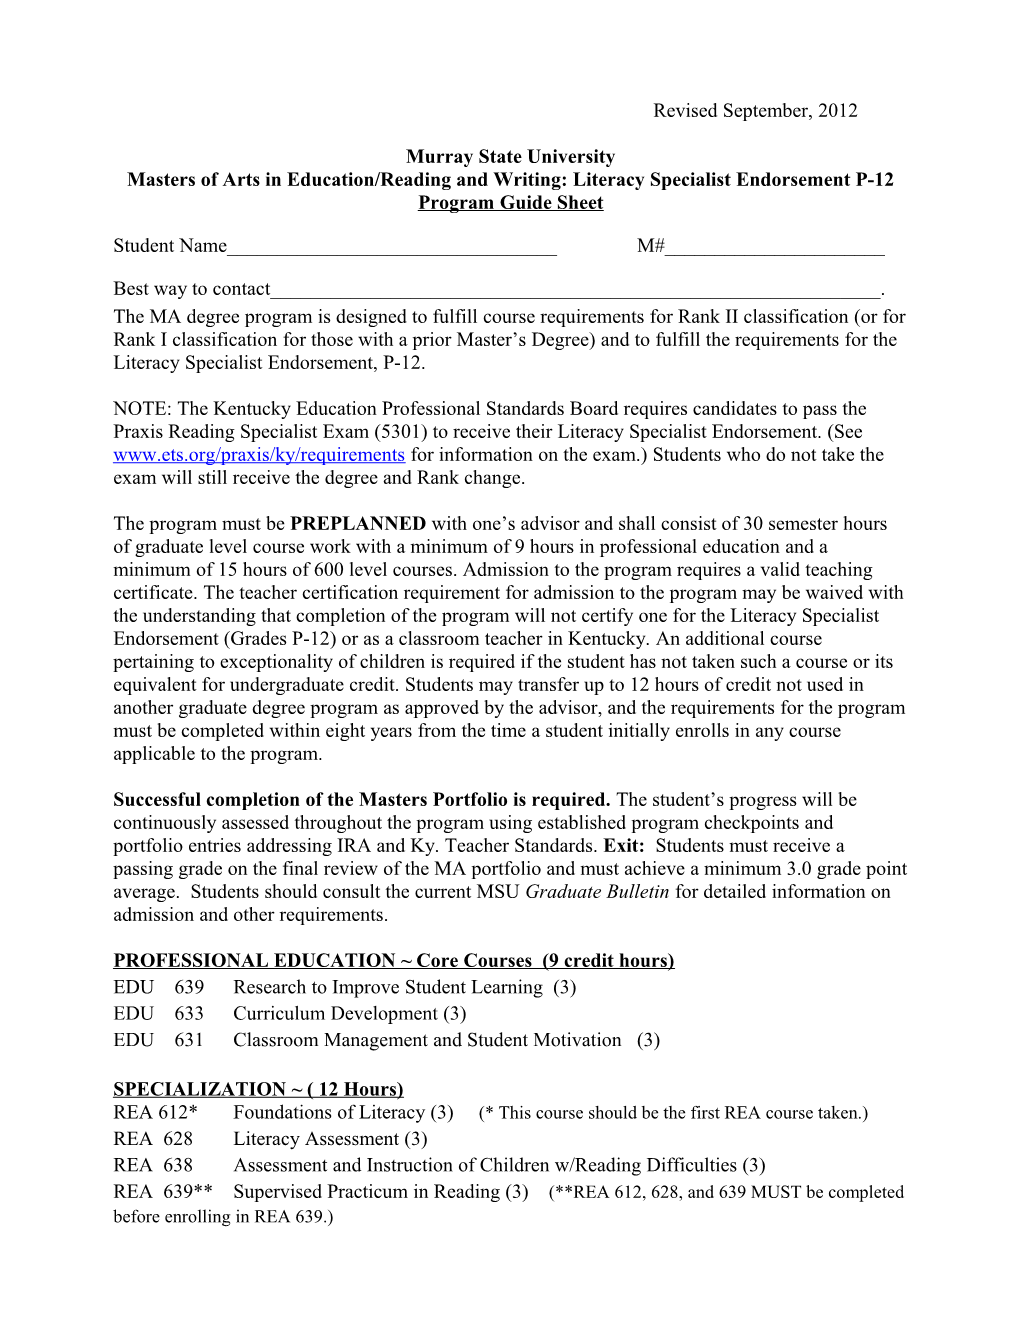 Masters of Arts in Education/Reading and Writing: Literacy Specialist Endorsement P-12